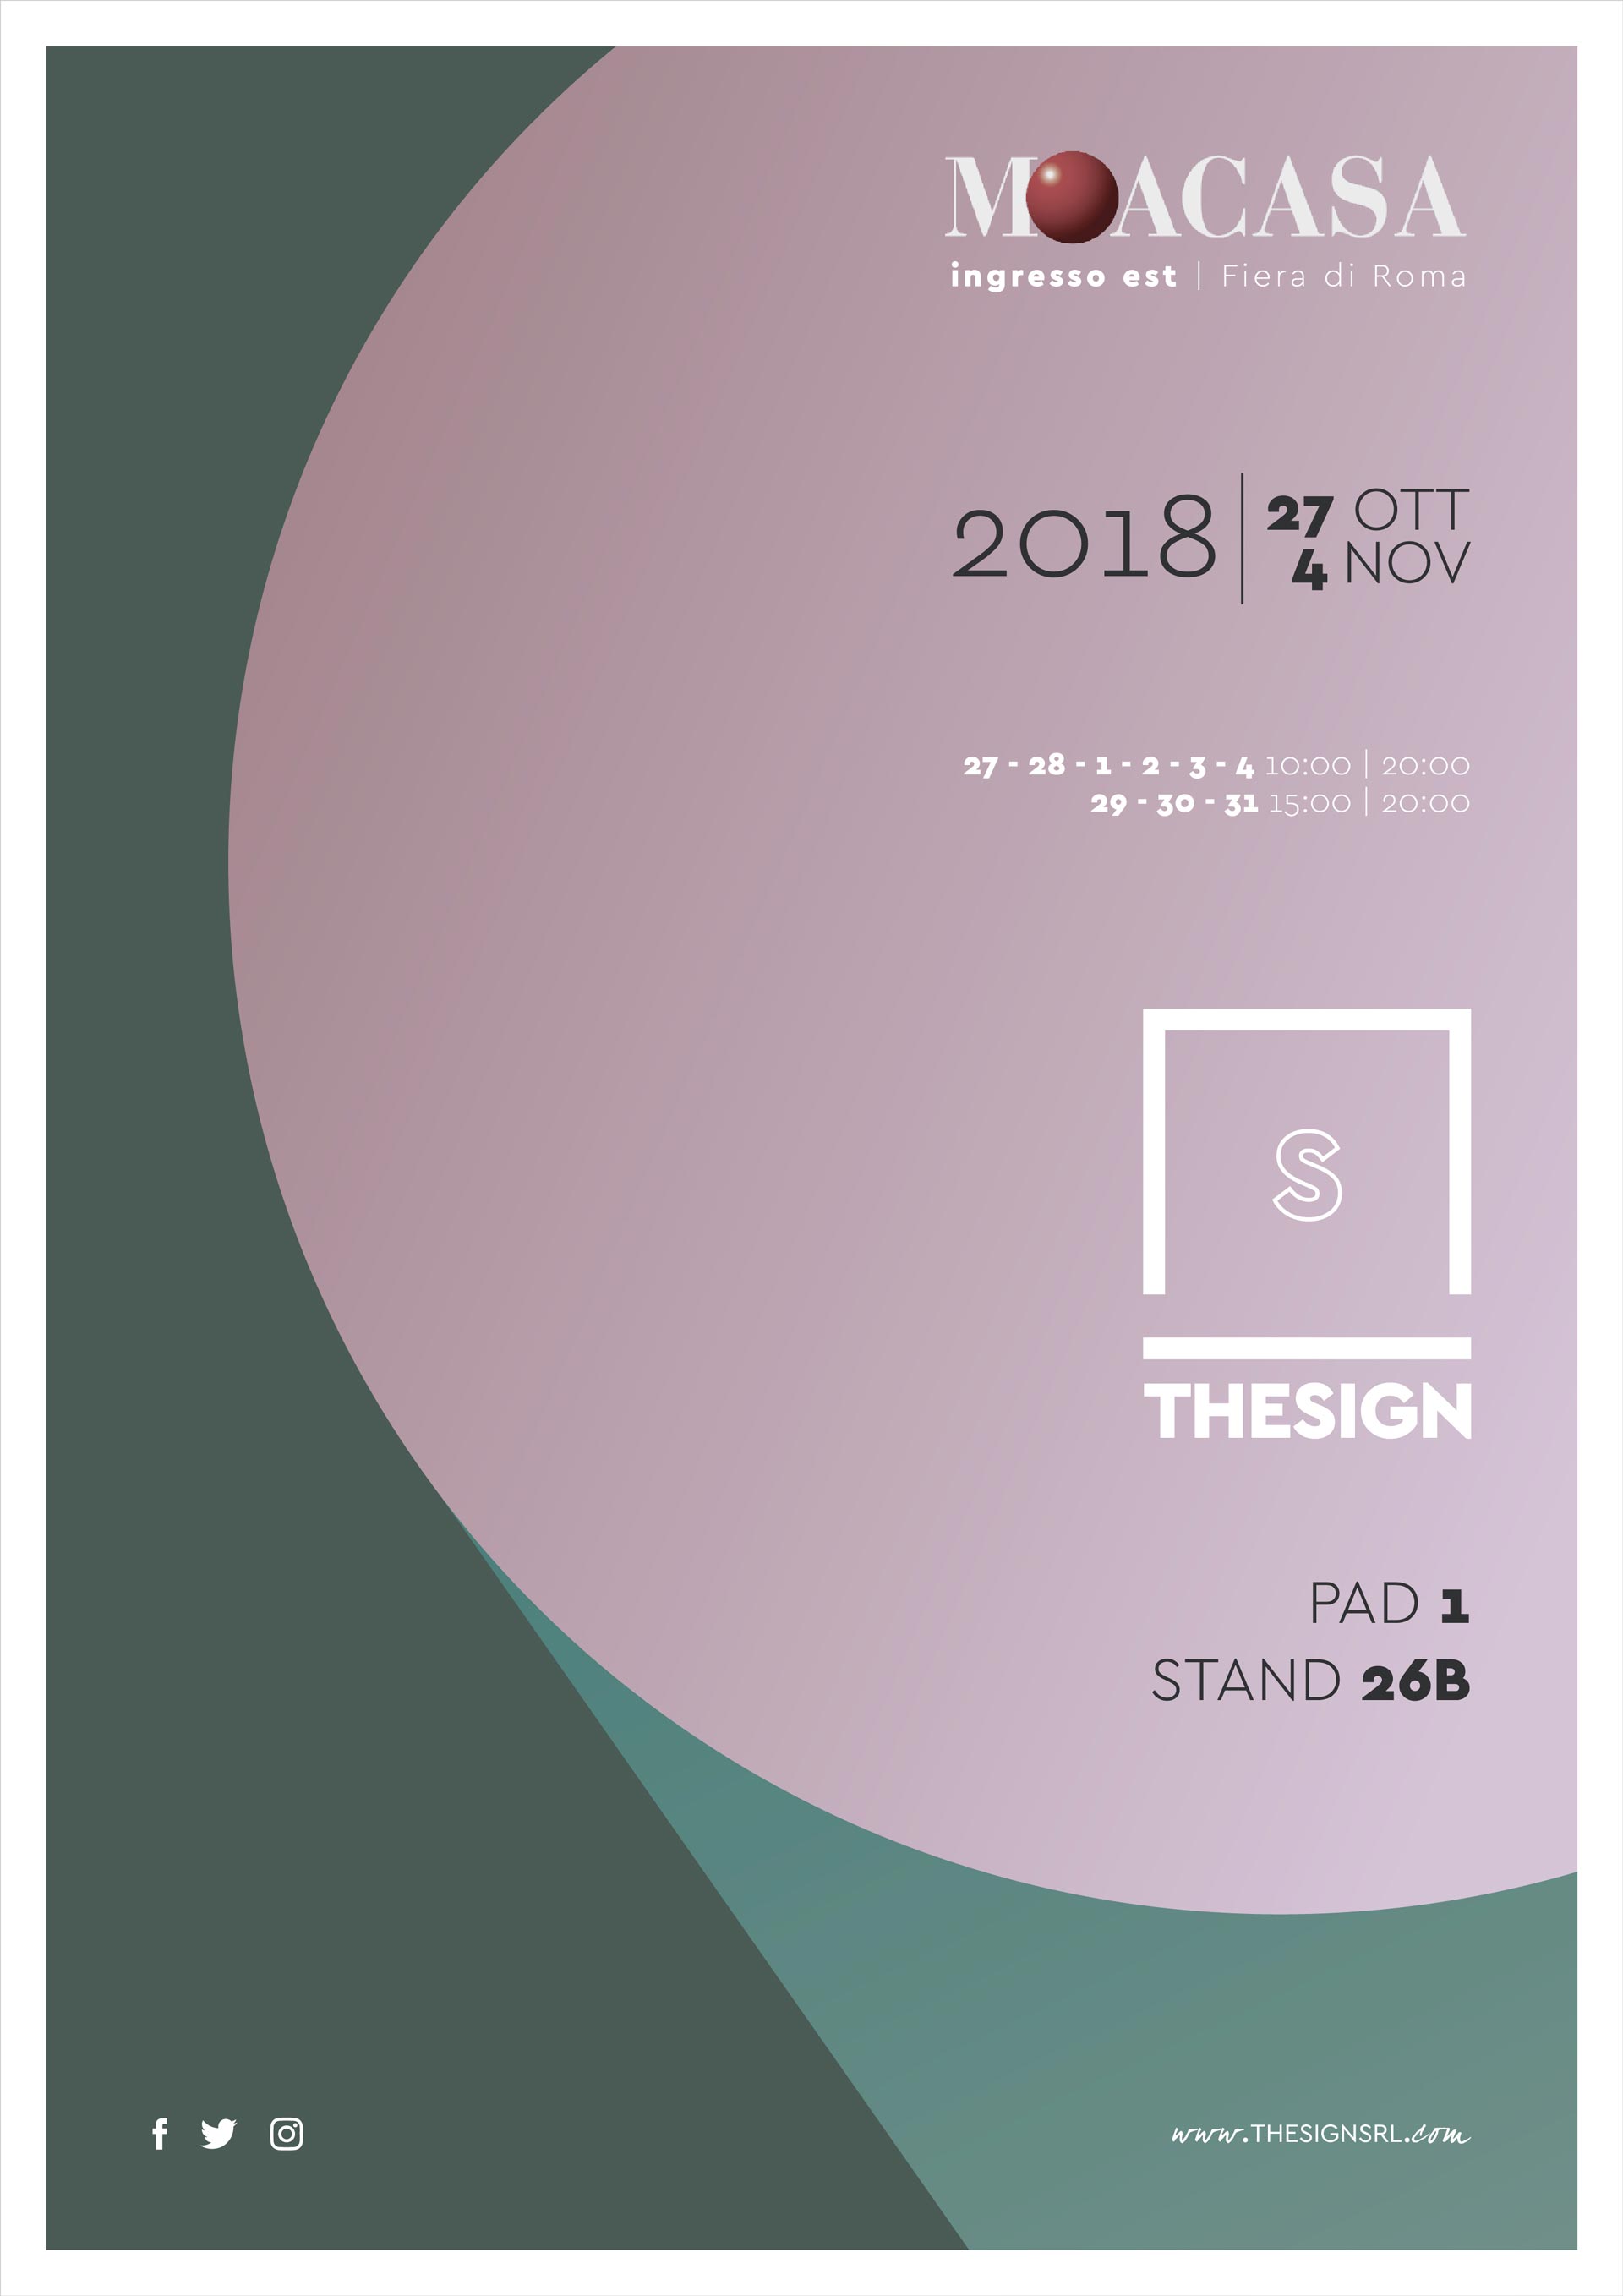 Cantori at Moacasa 2018 with Thesign - Cantori